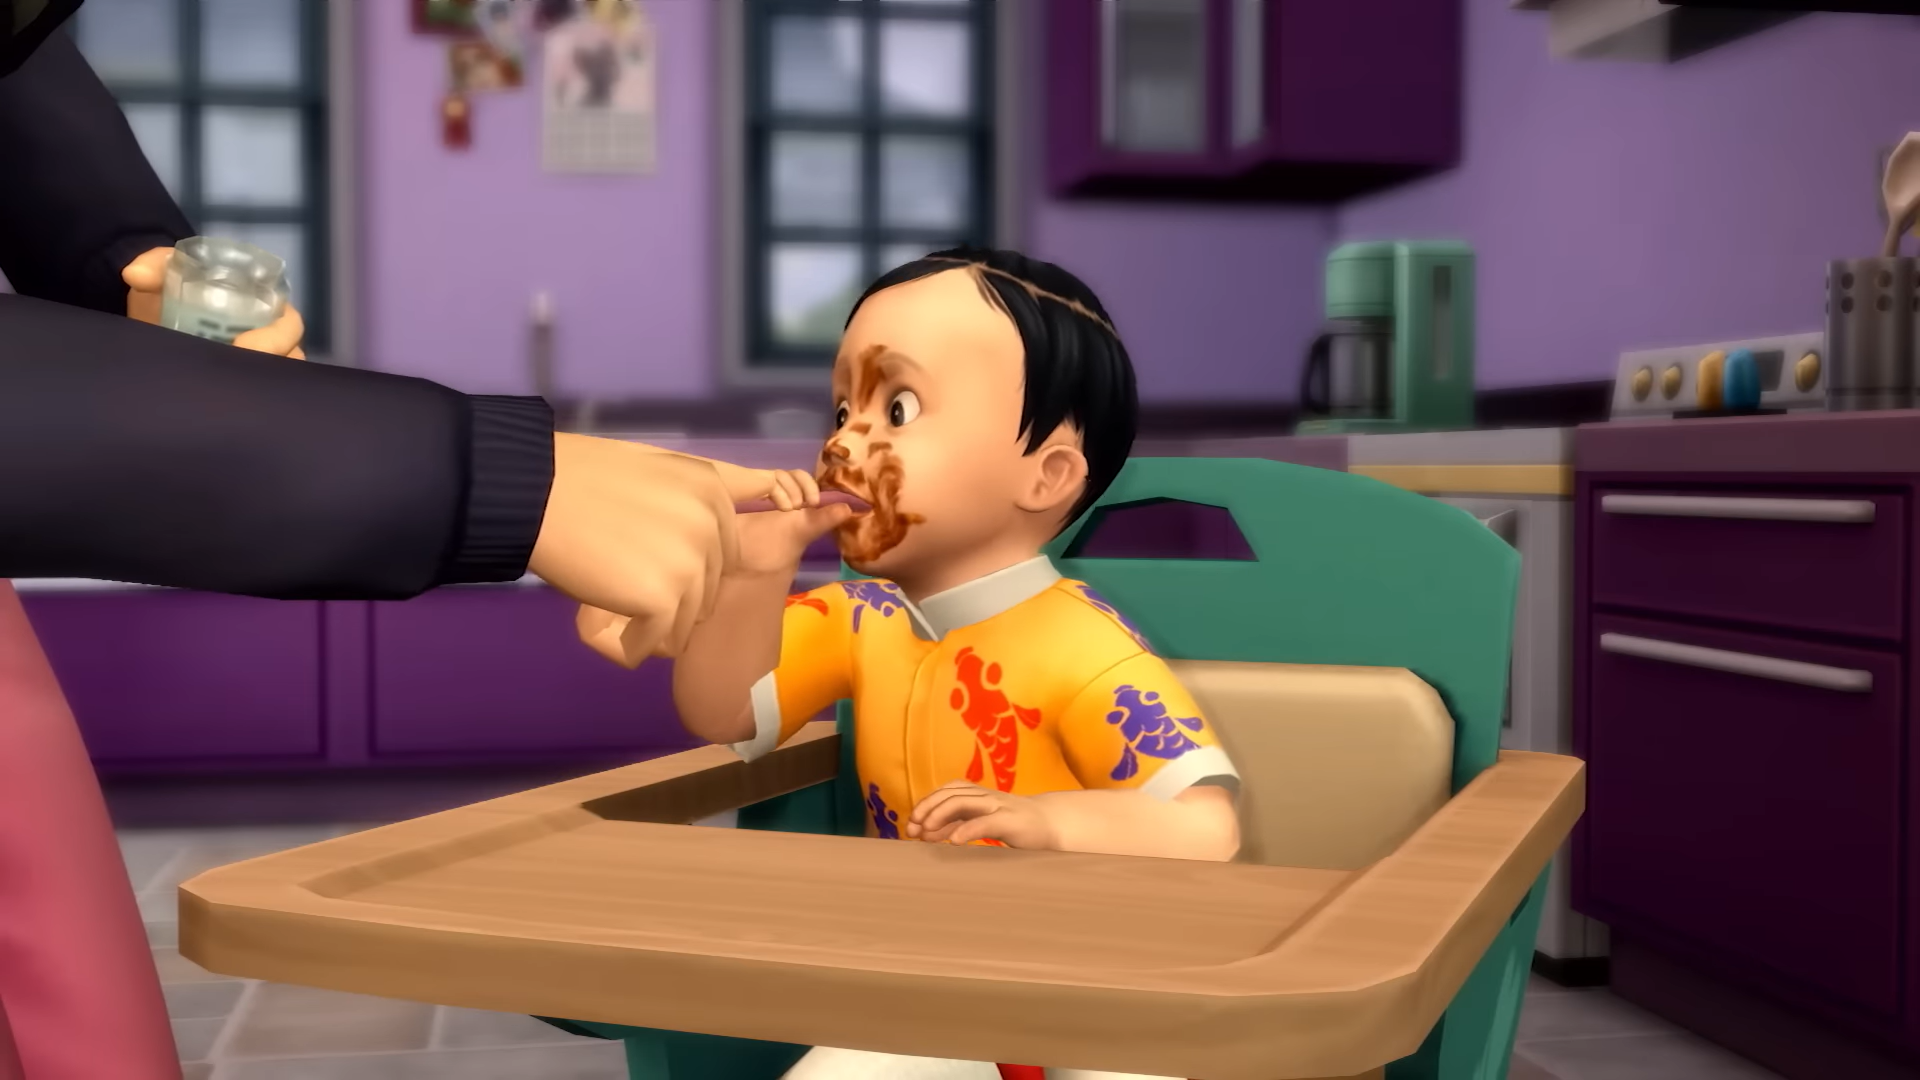 Image for The Sims 4 infant update has a March due date